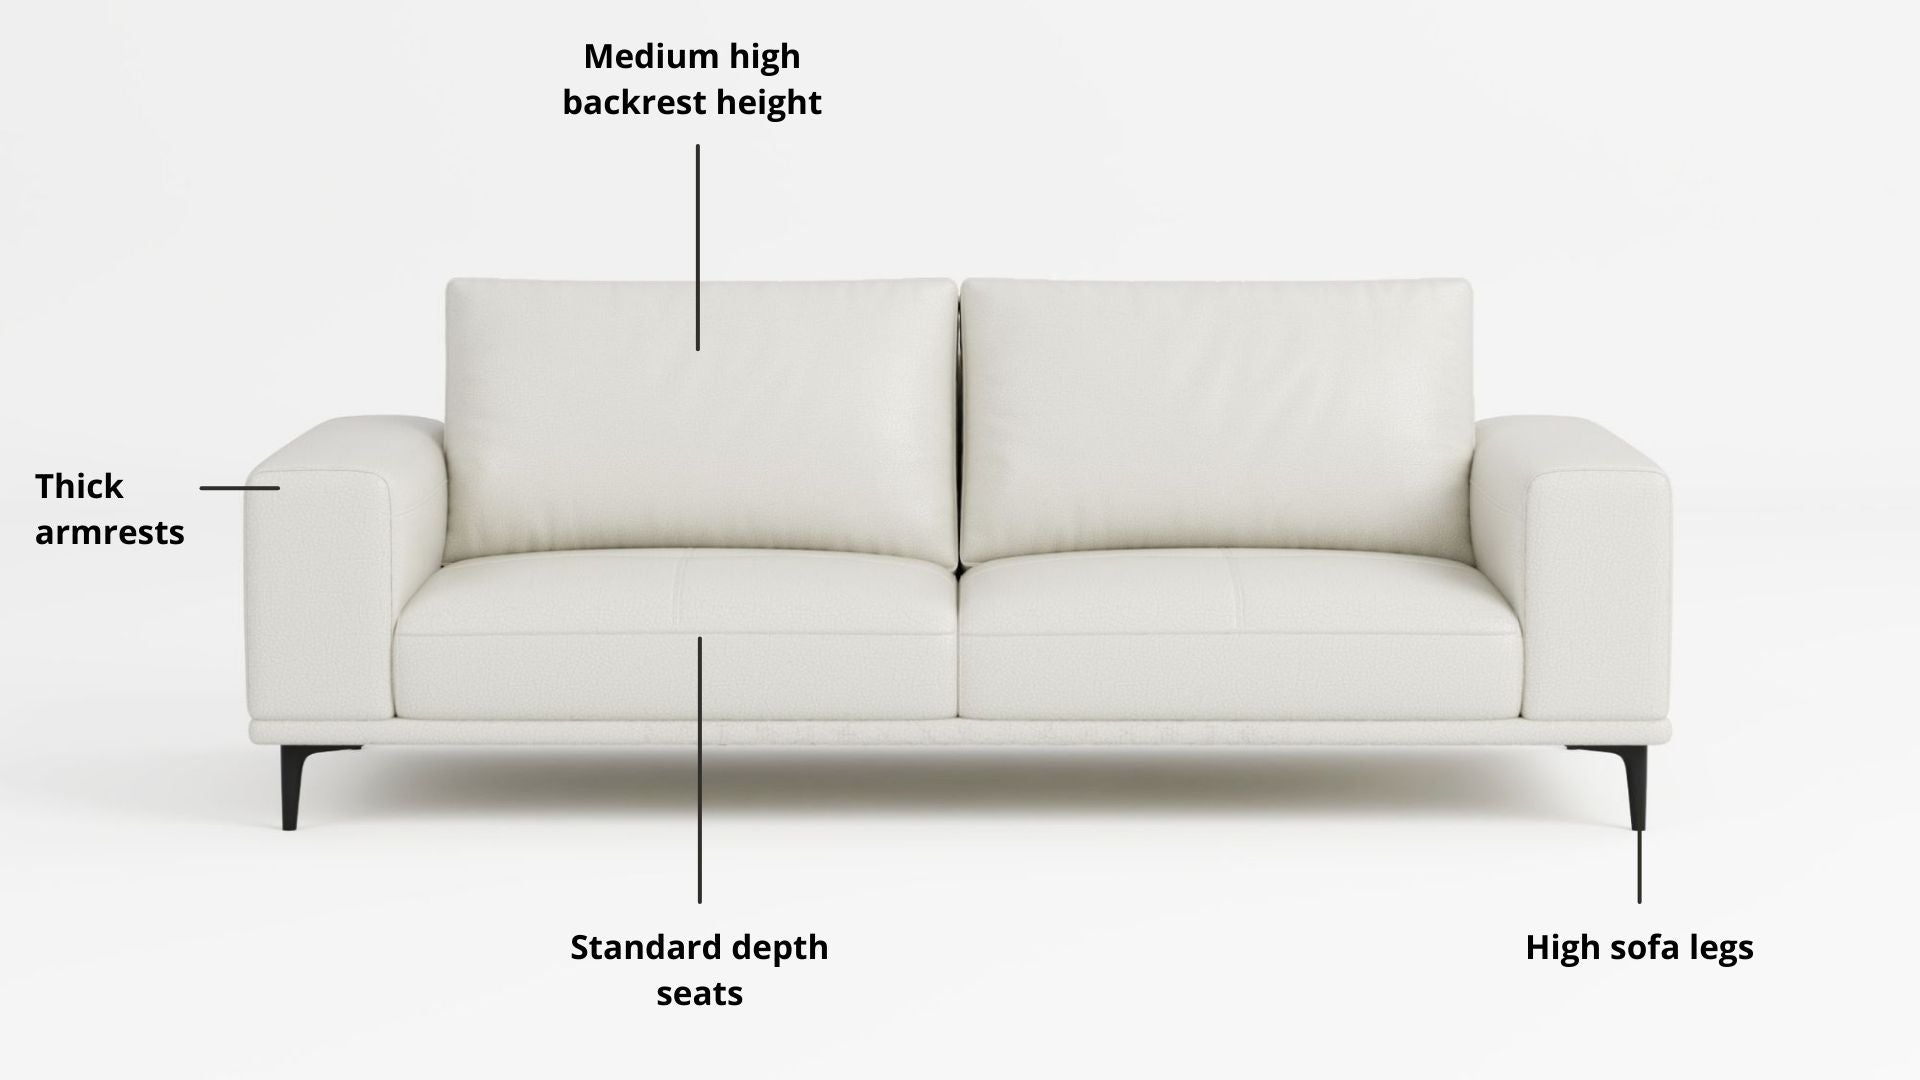 Key features such as armrest thickness, cushion height, seat depth and sofa leg height for Calm Half Leather Sofa